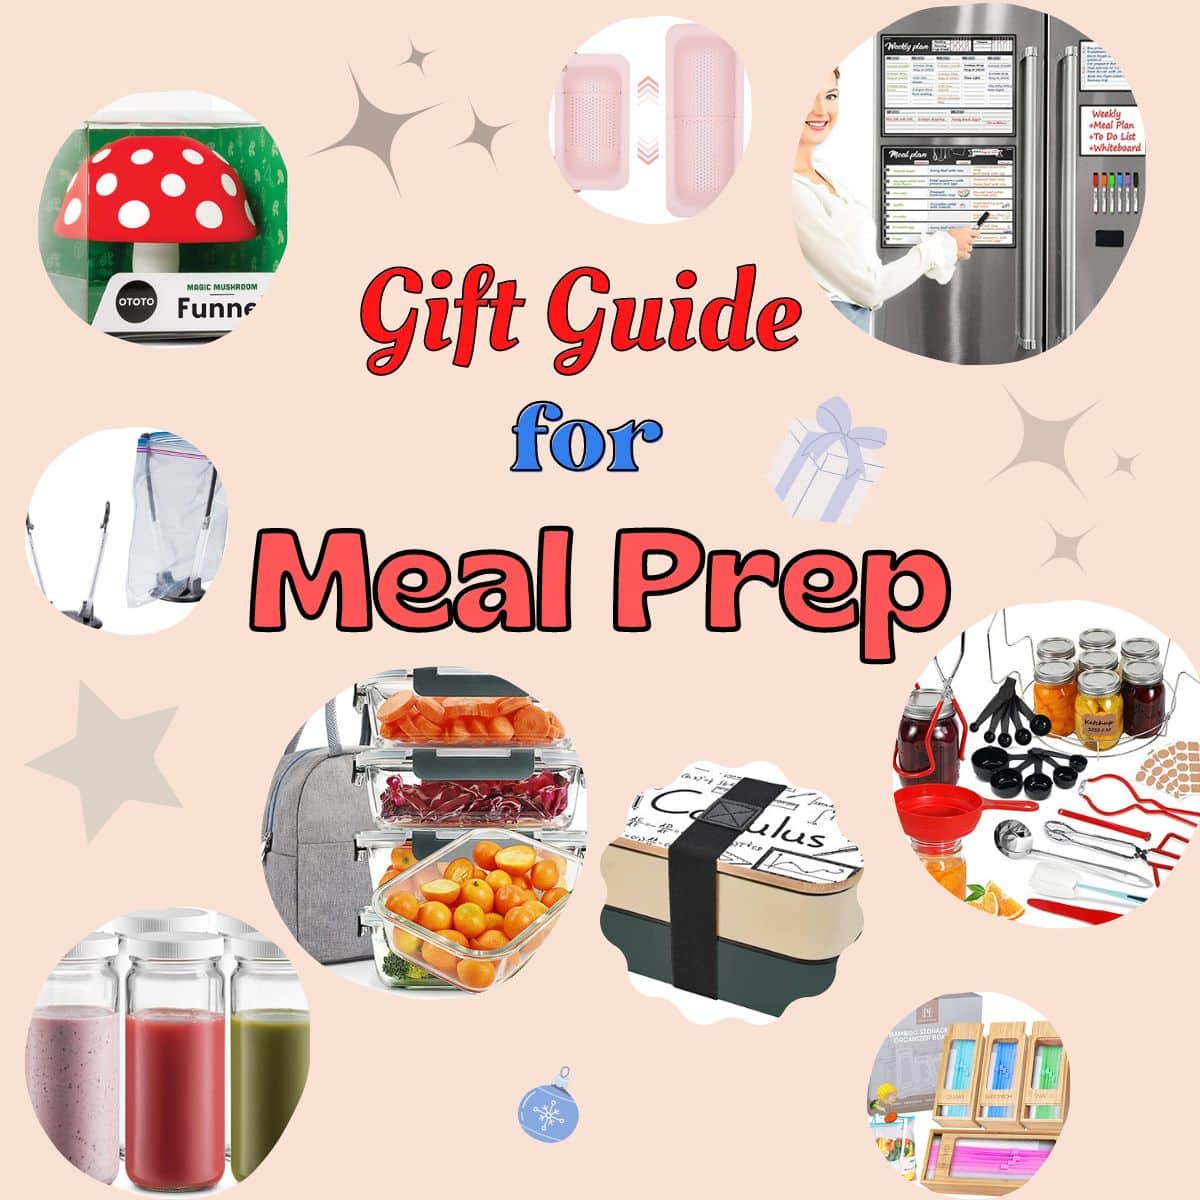 Collage of 9 images with the title "Gift Guide for Meal Prep"